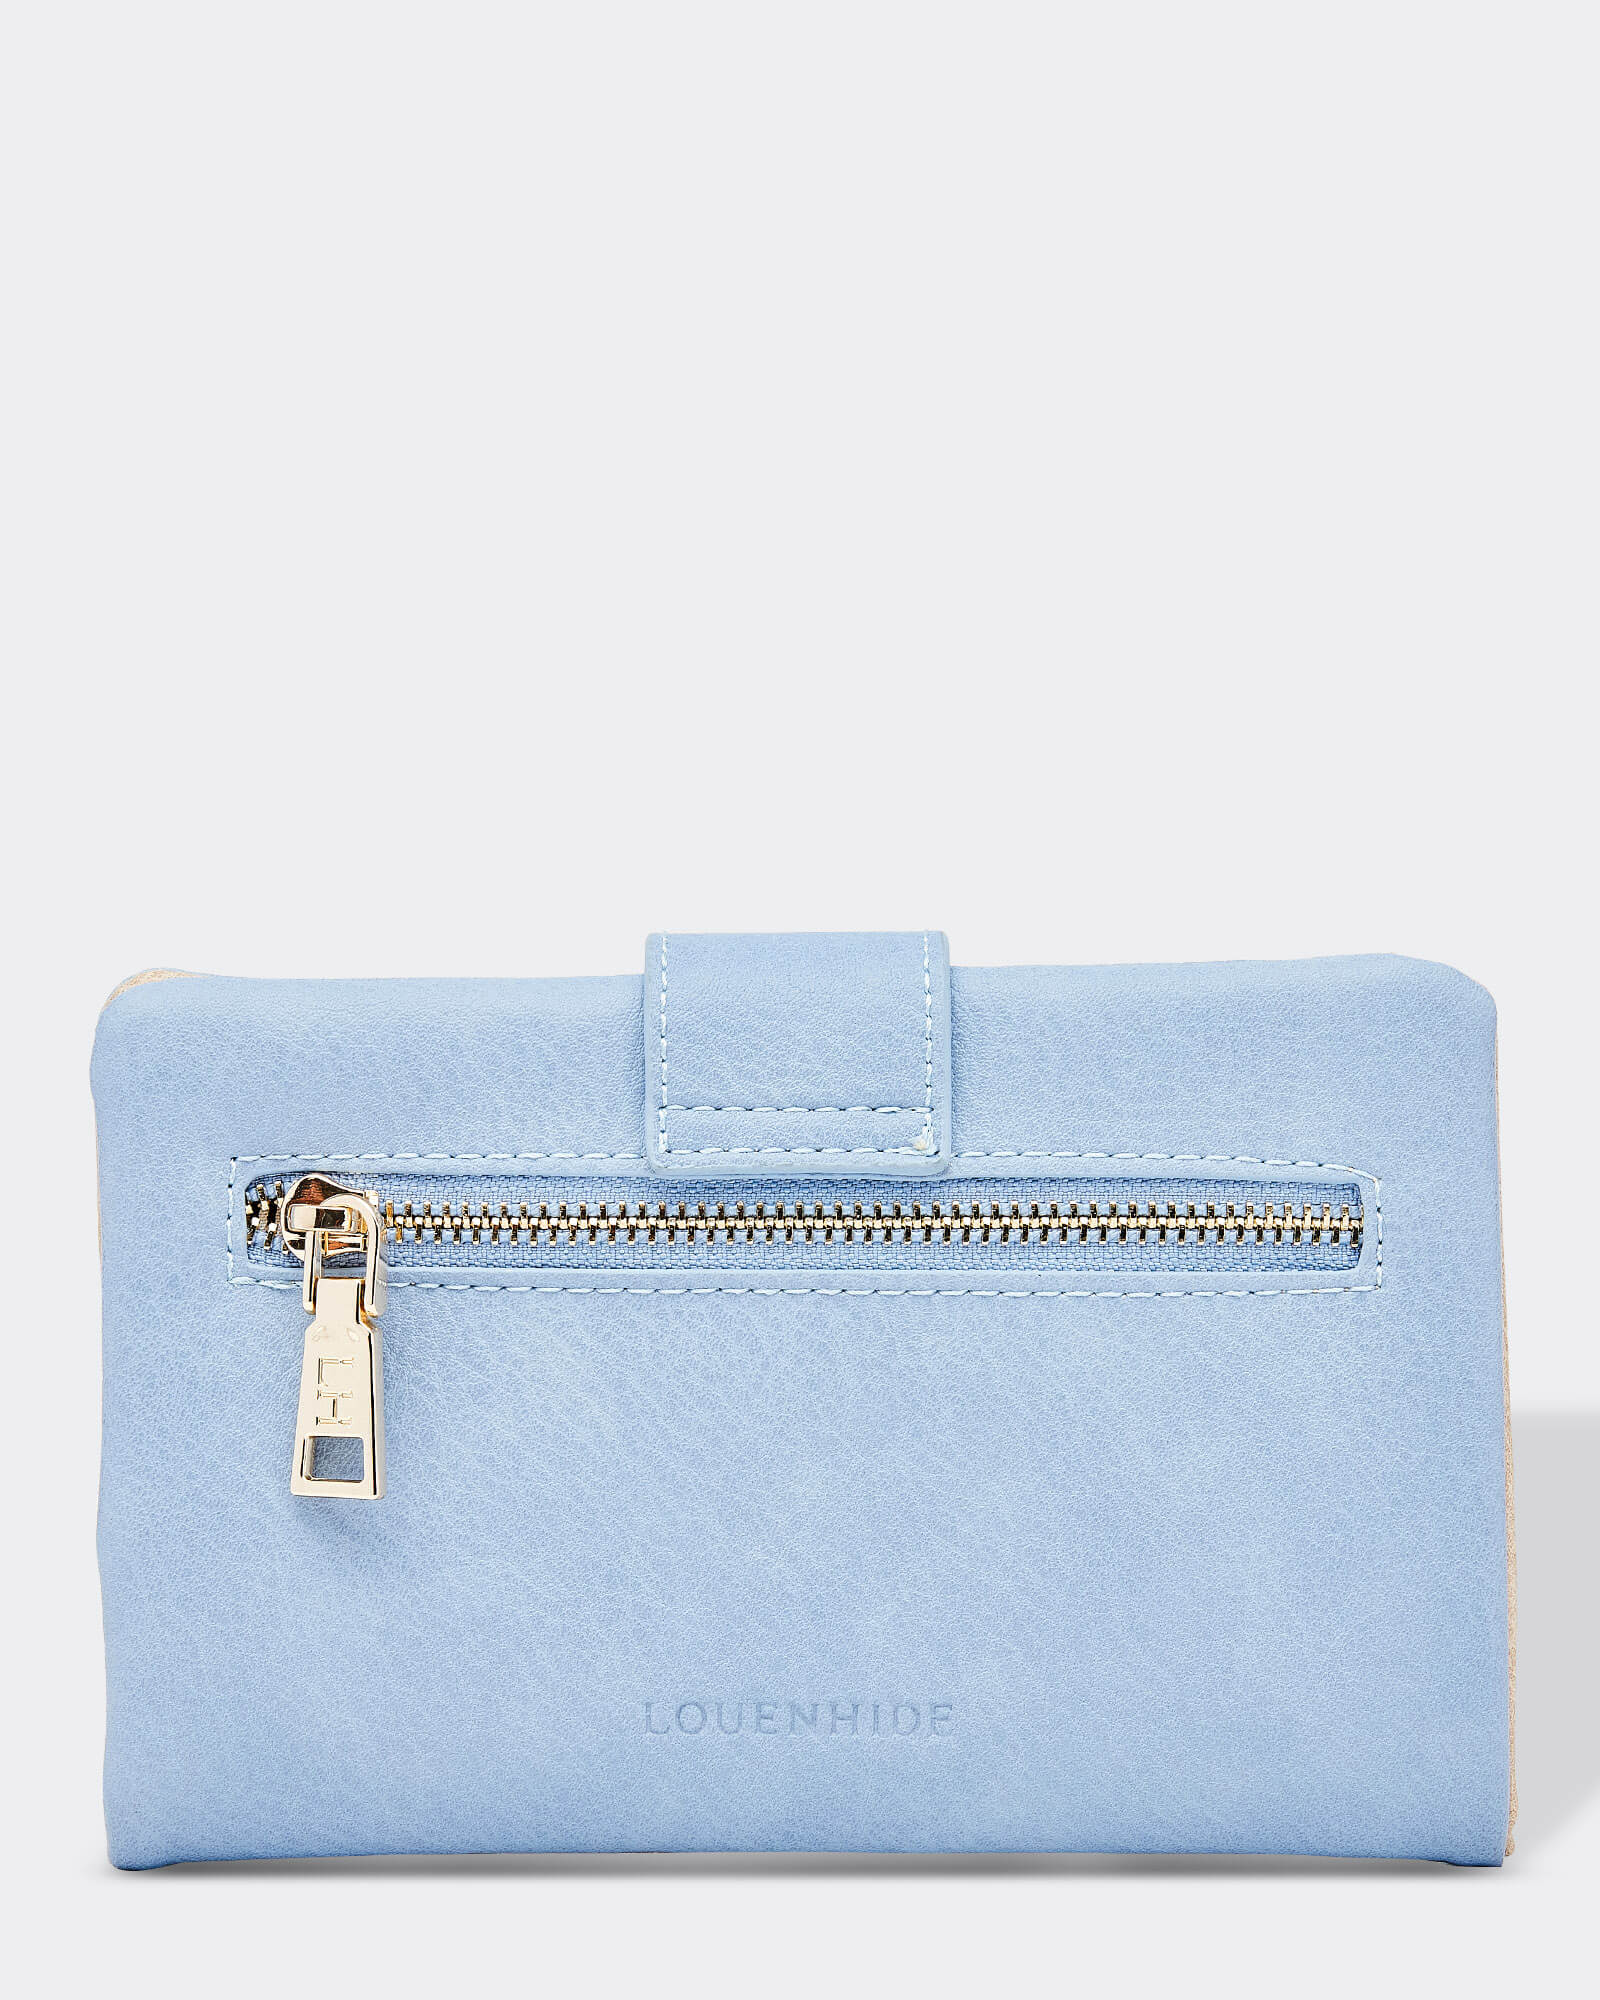 Louenhide Bailey Wallet Chambray